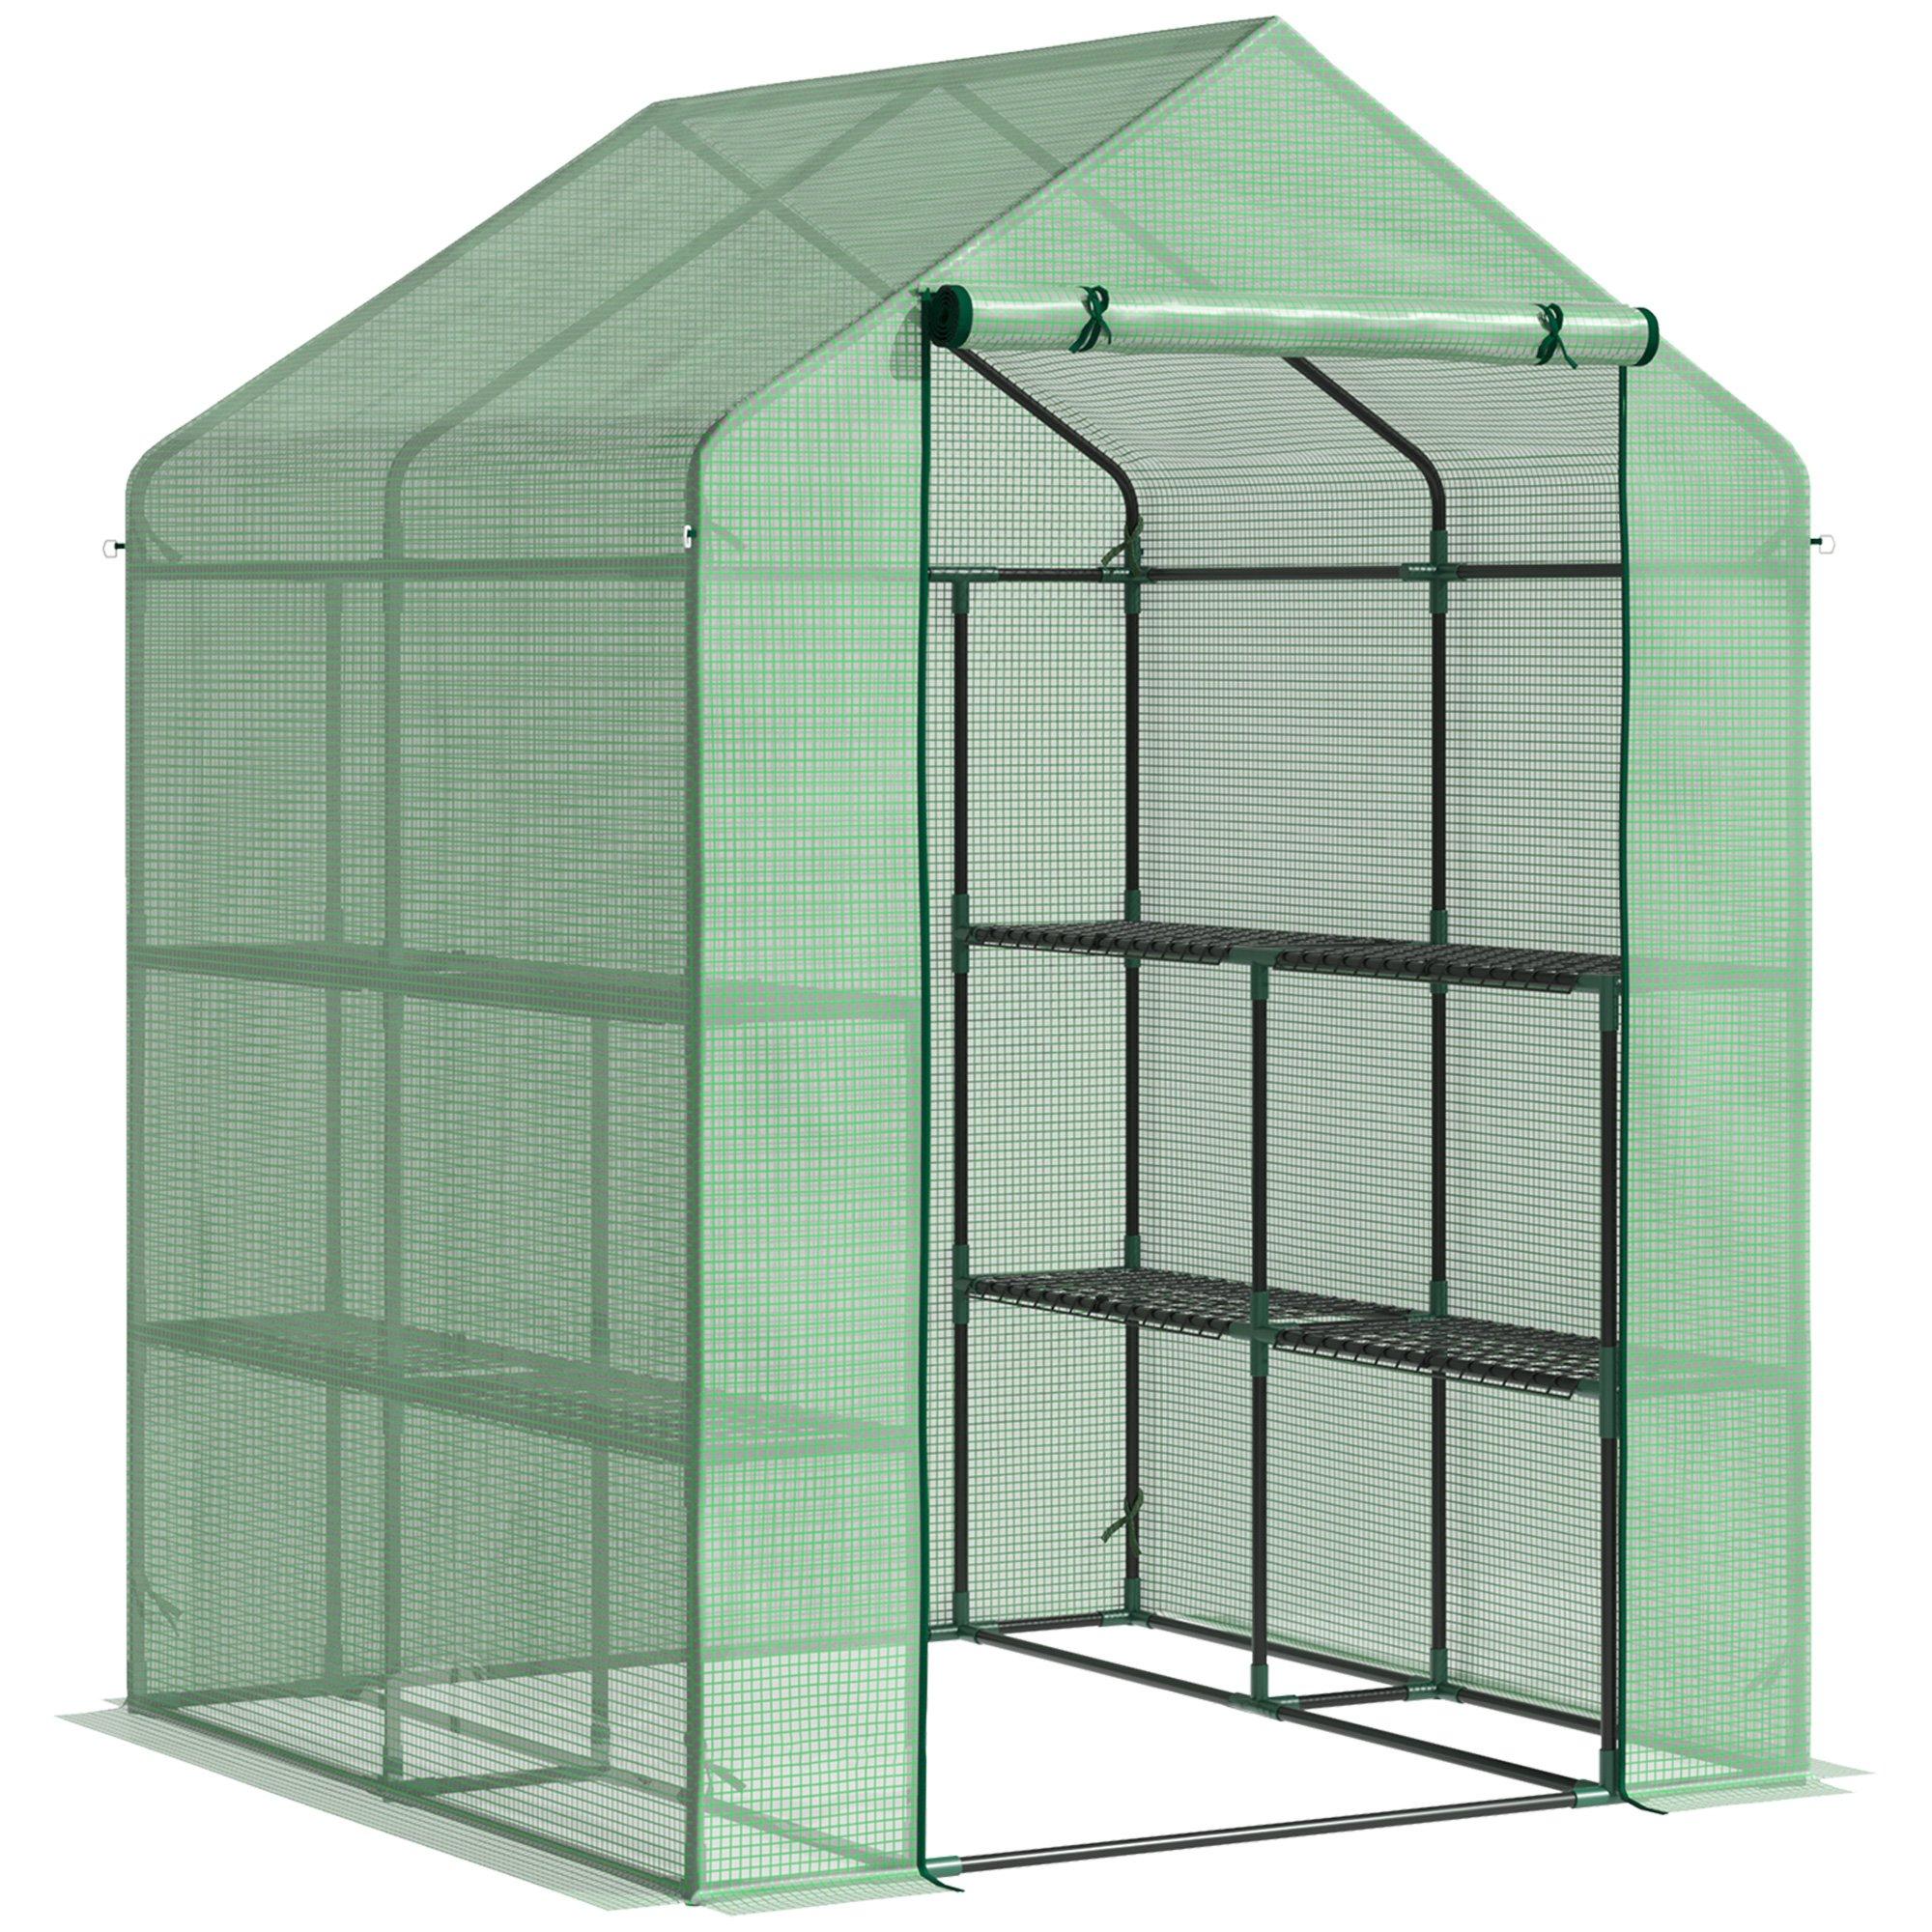 Walk-in Greenhouse with Shelves, Outdoor Green House